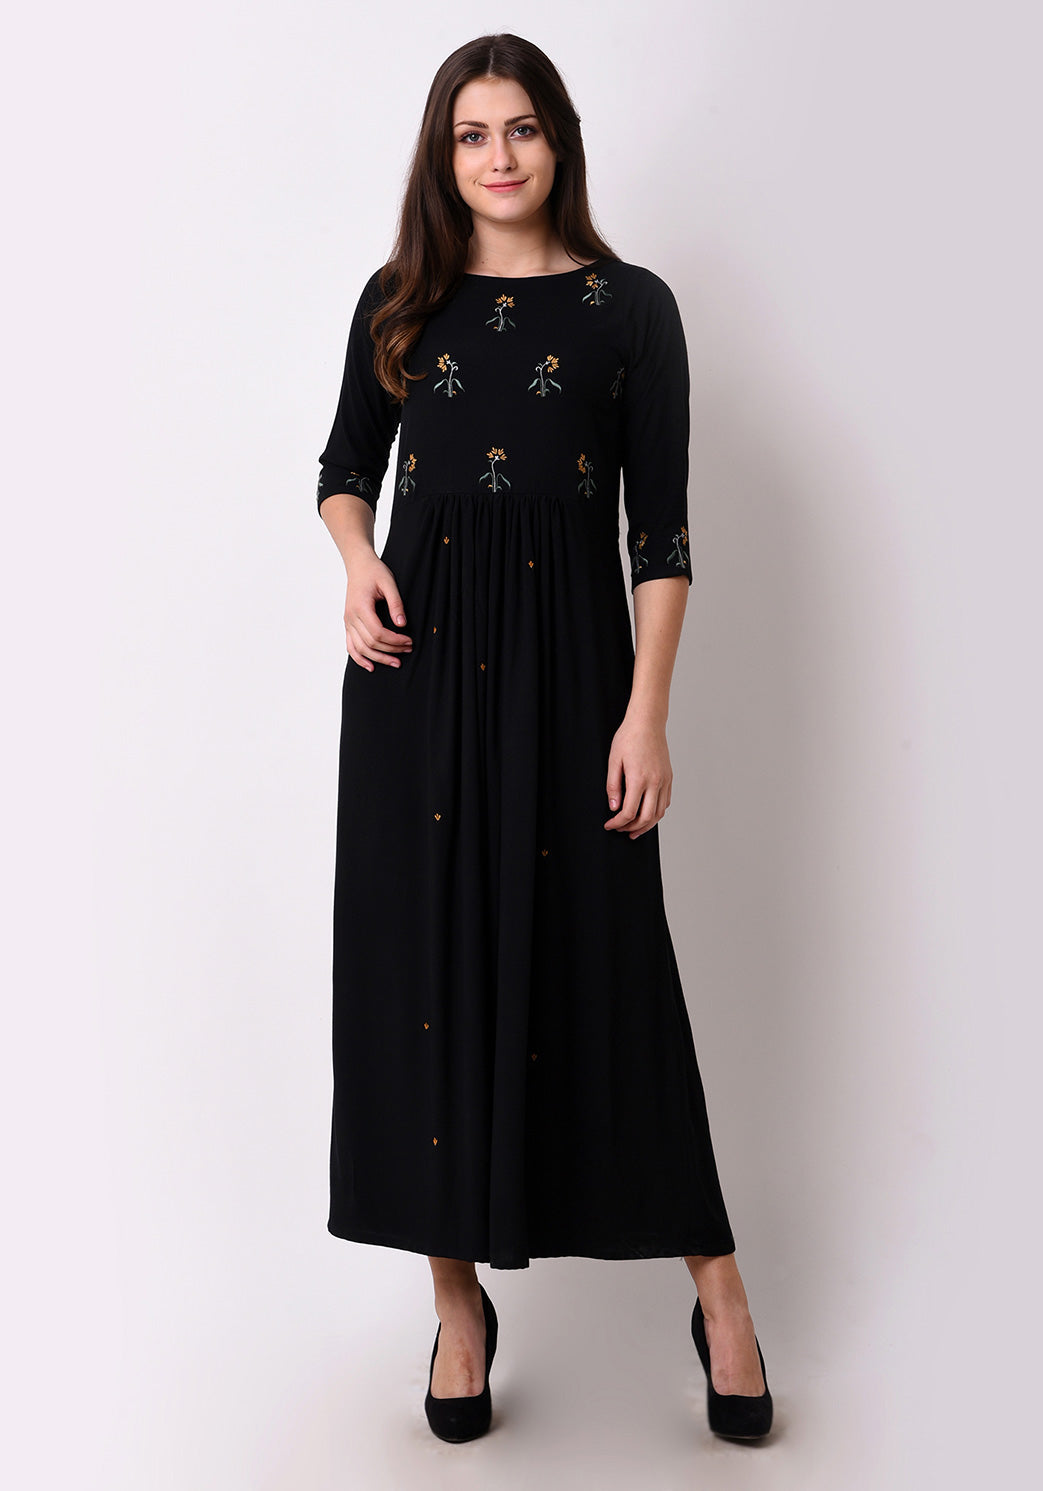 Floral Embroidered Gathered Maxi Dress - Black